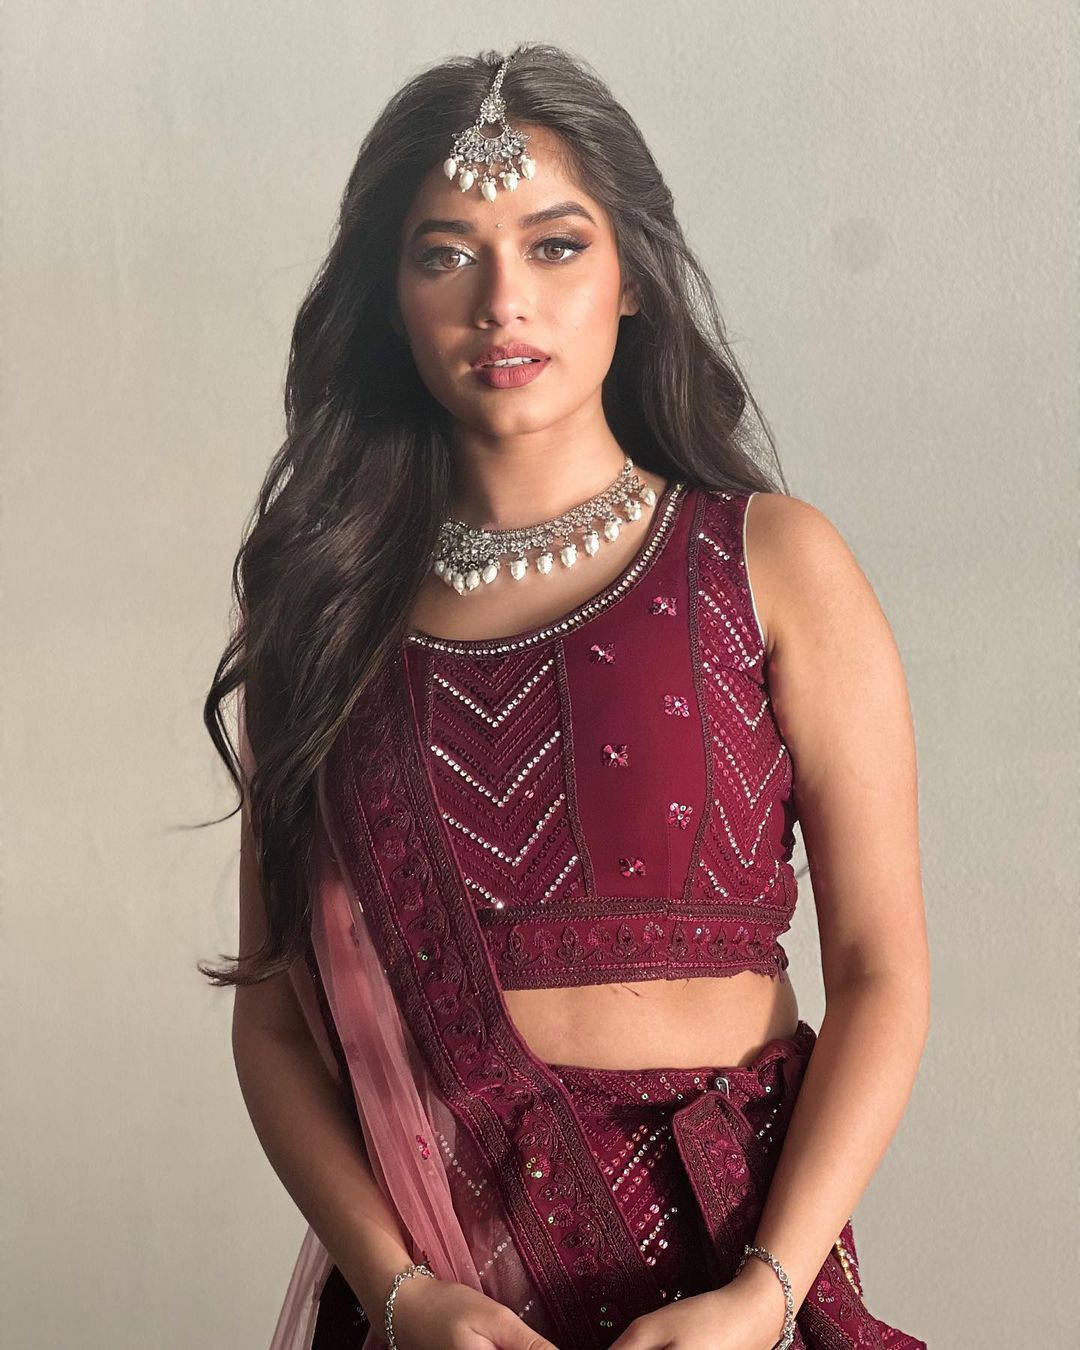 From Anushka Sen, Avneet Kaur to Jannat Zubair Rahmani: The traditional looks of these actresses rocked the hearts of fans 9595